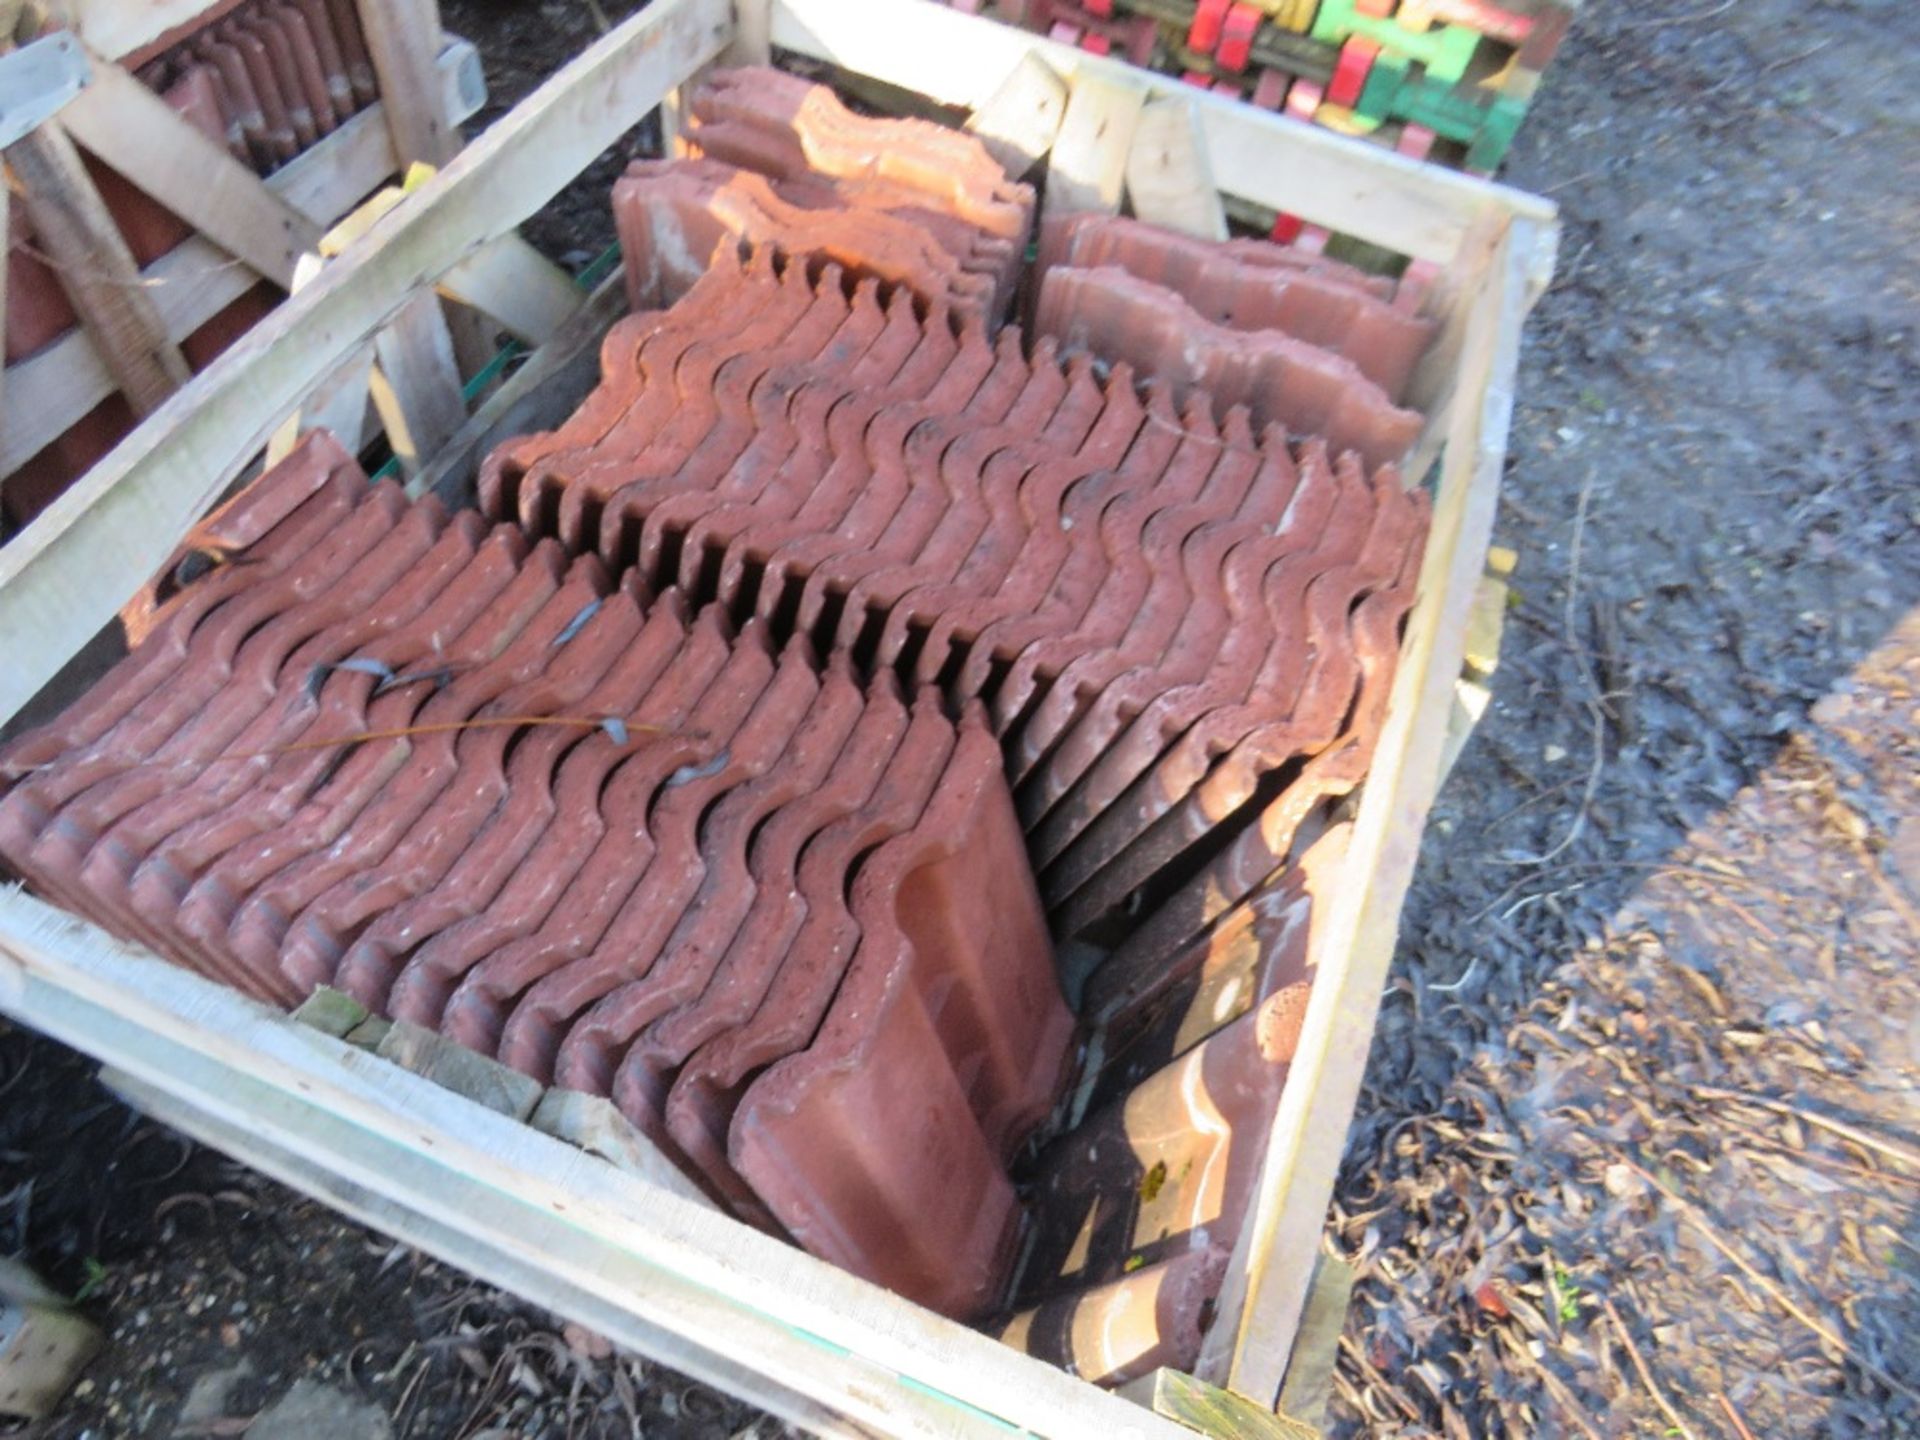 6 X STILLAGES OF REDLAND CONCRETE ROOF TILES, PRE USED. RECENTLY REMOVED FROM HOUSE BEING DEMOLISHED - Image 2 of 5